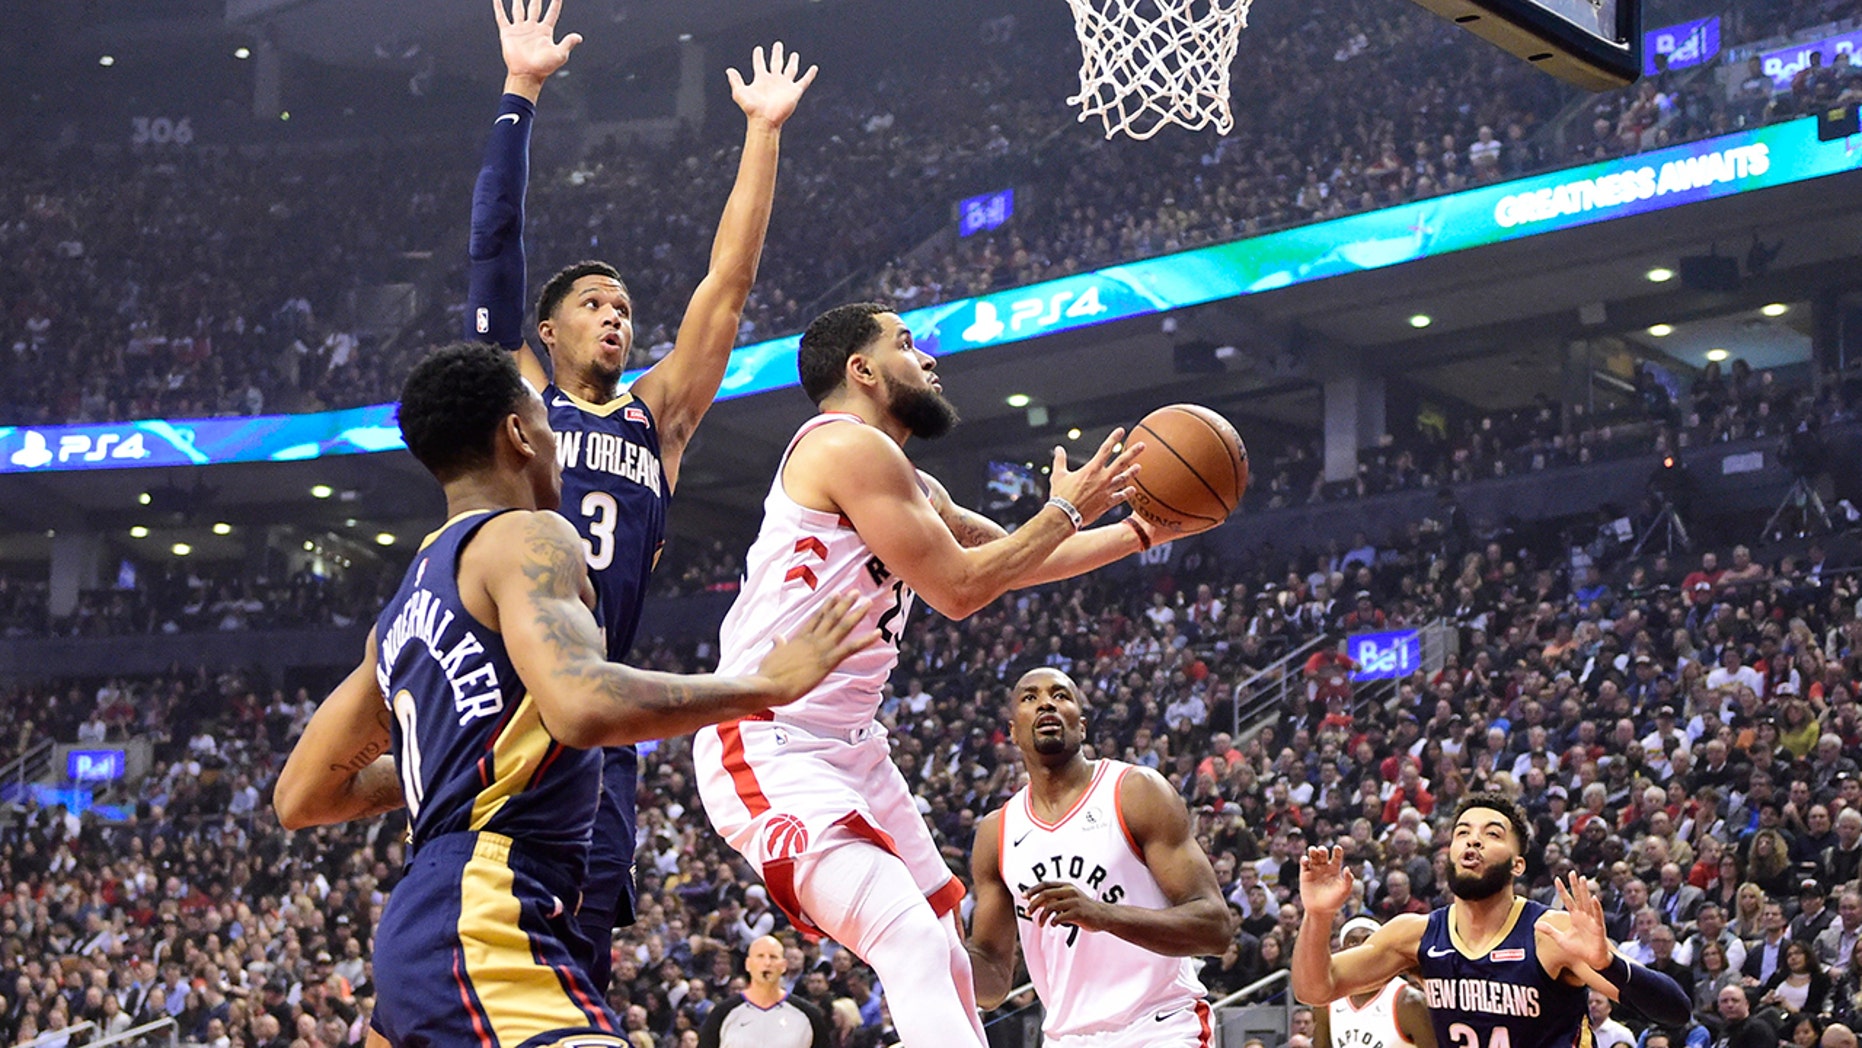 Toronto Raptors guard Fred VanVleet (23) goes to the basket as New Orleans Pelicans' Josh Hart (3) and Nickeil Alexander-Walker (0) defend during the first half of an NBA basketball game Tuesday, Oct. 22, 2019, in Toronto. (Frank Gunn/The Canadian Press via AP)